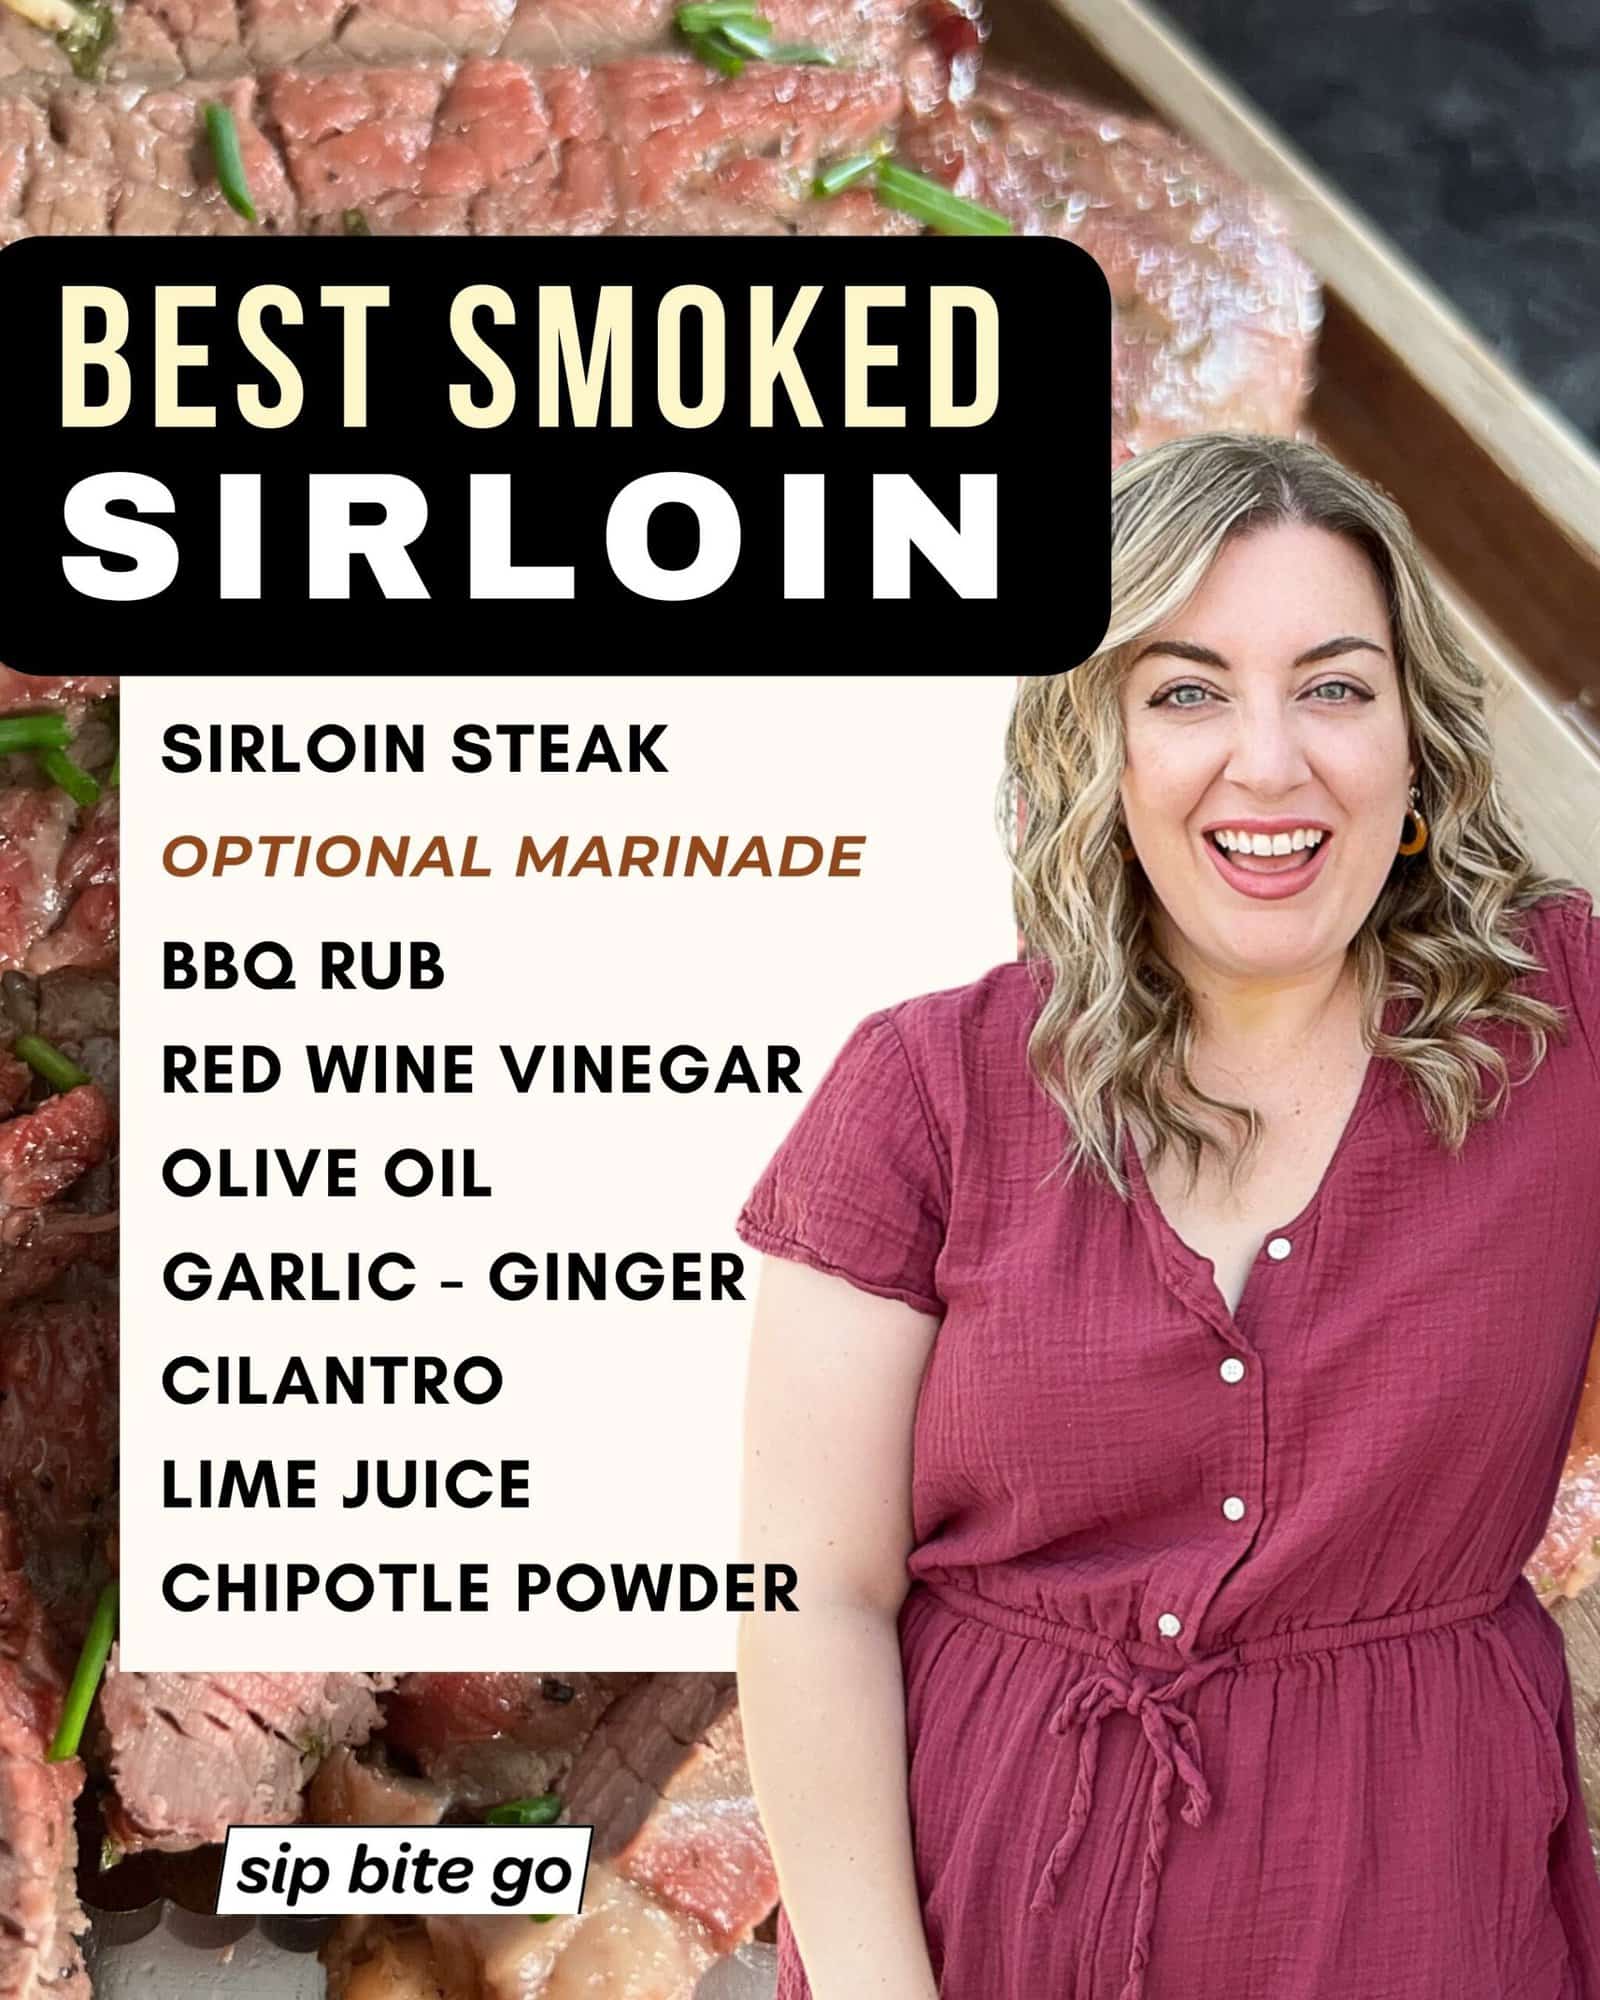 Infographic with recipe ingredients for top sirloin steak smoker main dish with marinade